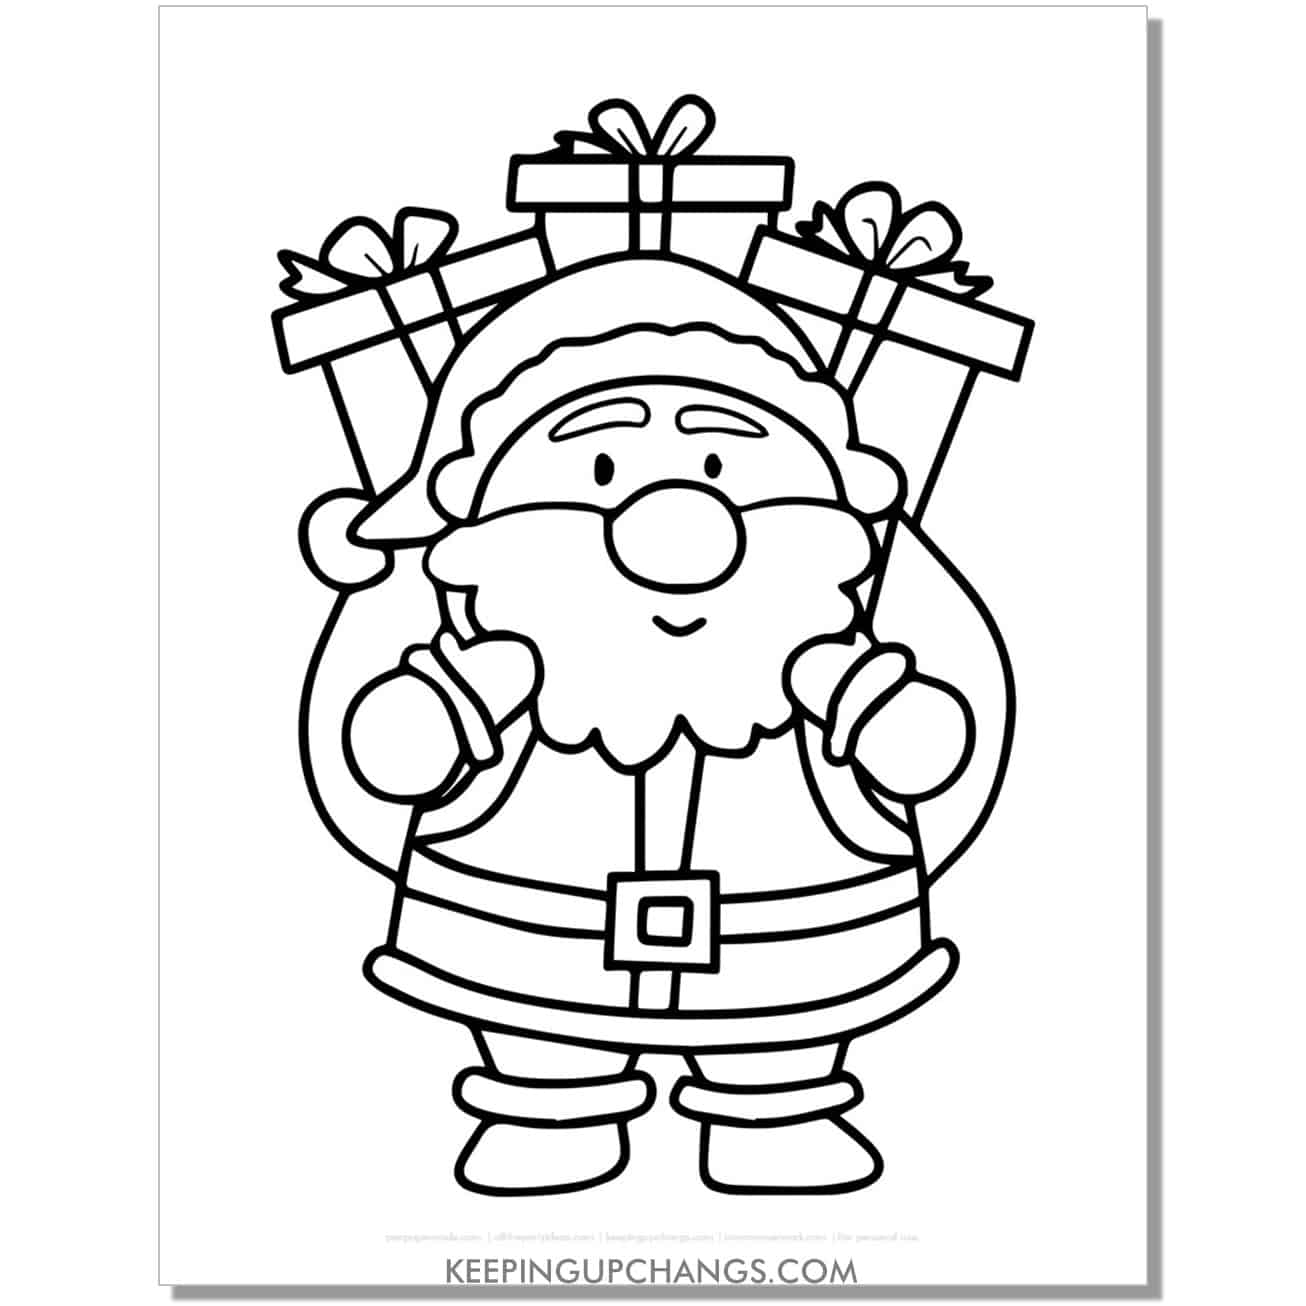 free santa with sack of presents outline, template, cut out, coloring page.